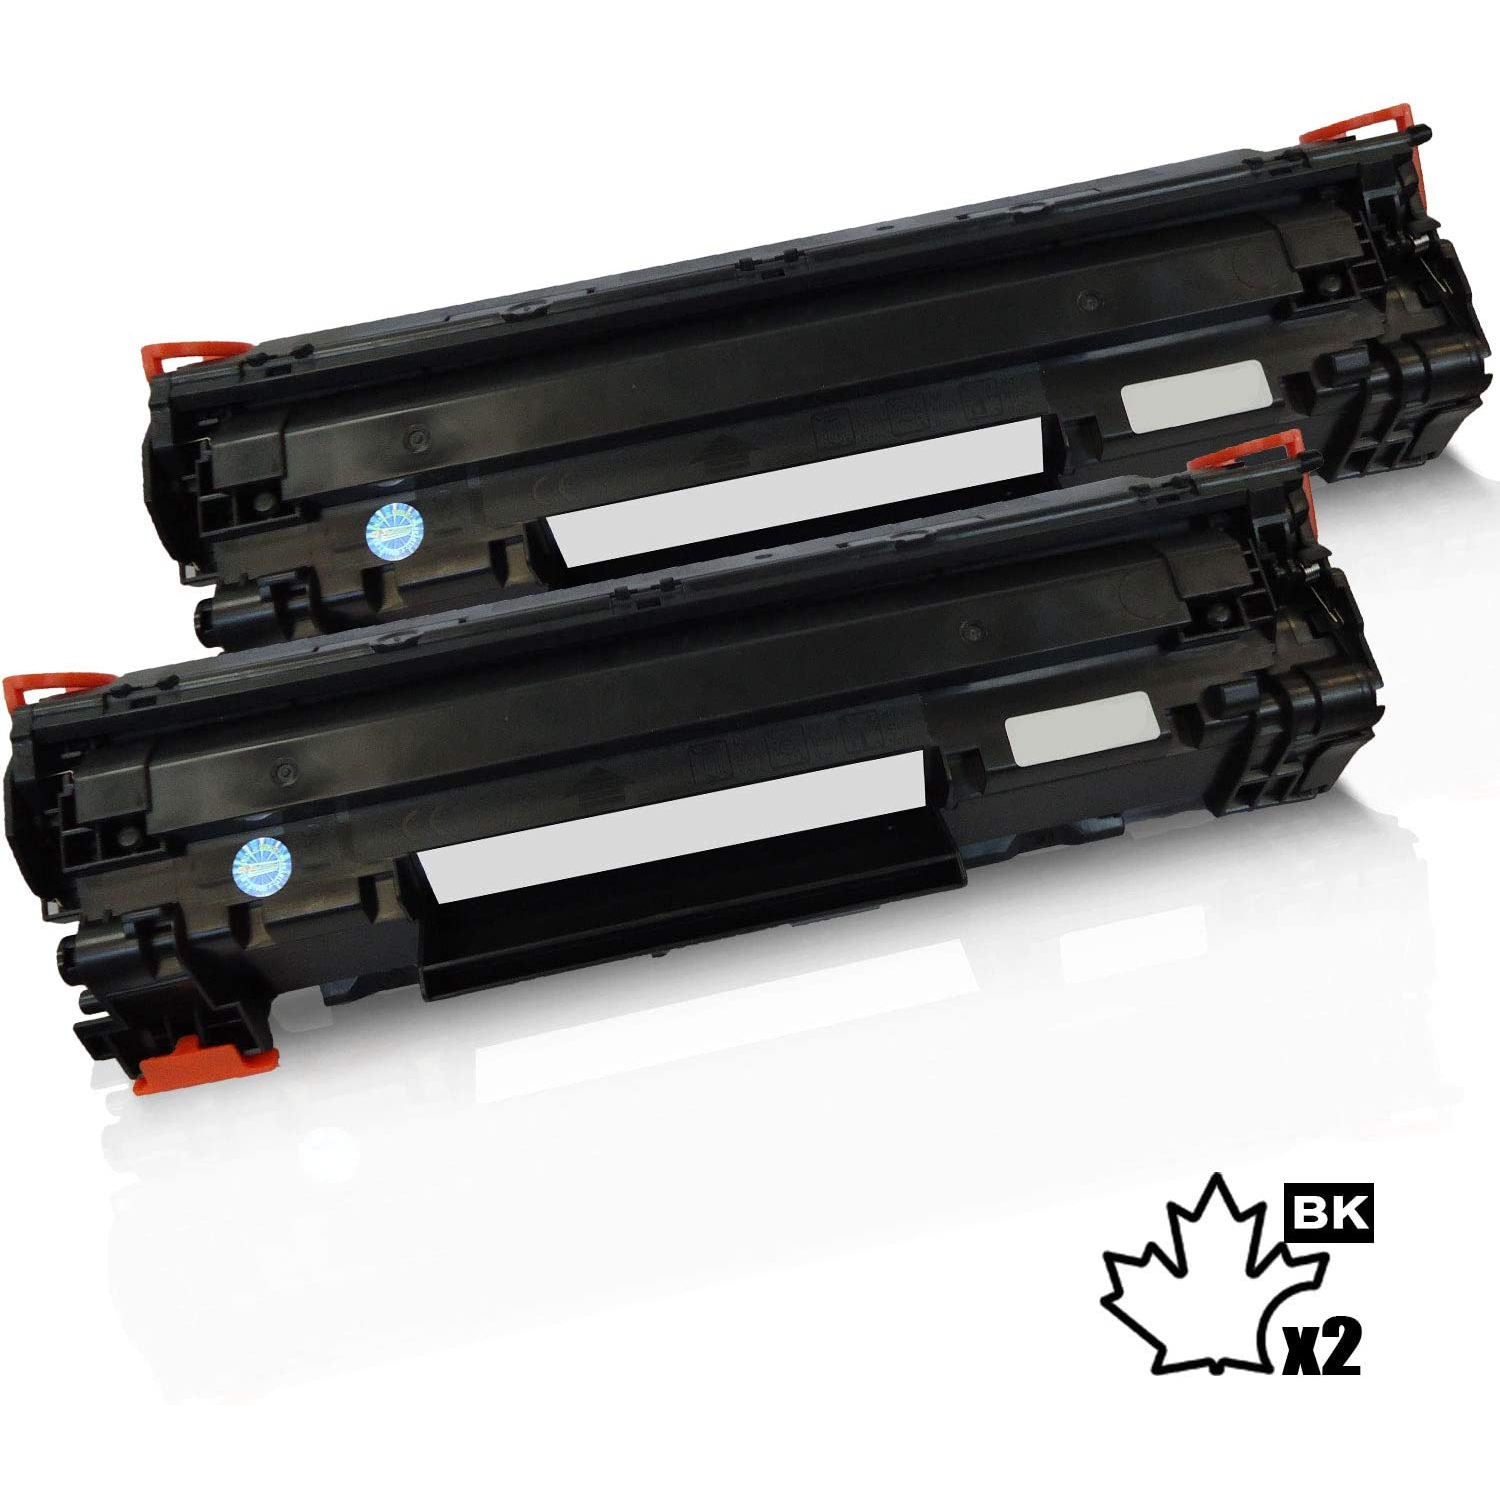 2 Inkfirst Compatible Toner Cartridges Replacement for Canon 128 3500B001AA ImageClass D530 D550 D560 MF4412 MF4420n MF4450